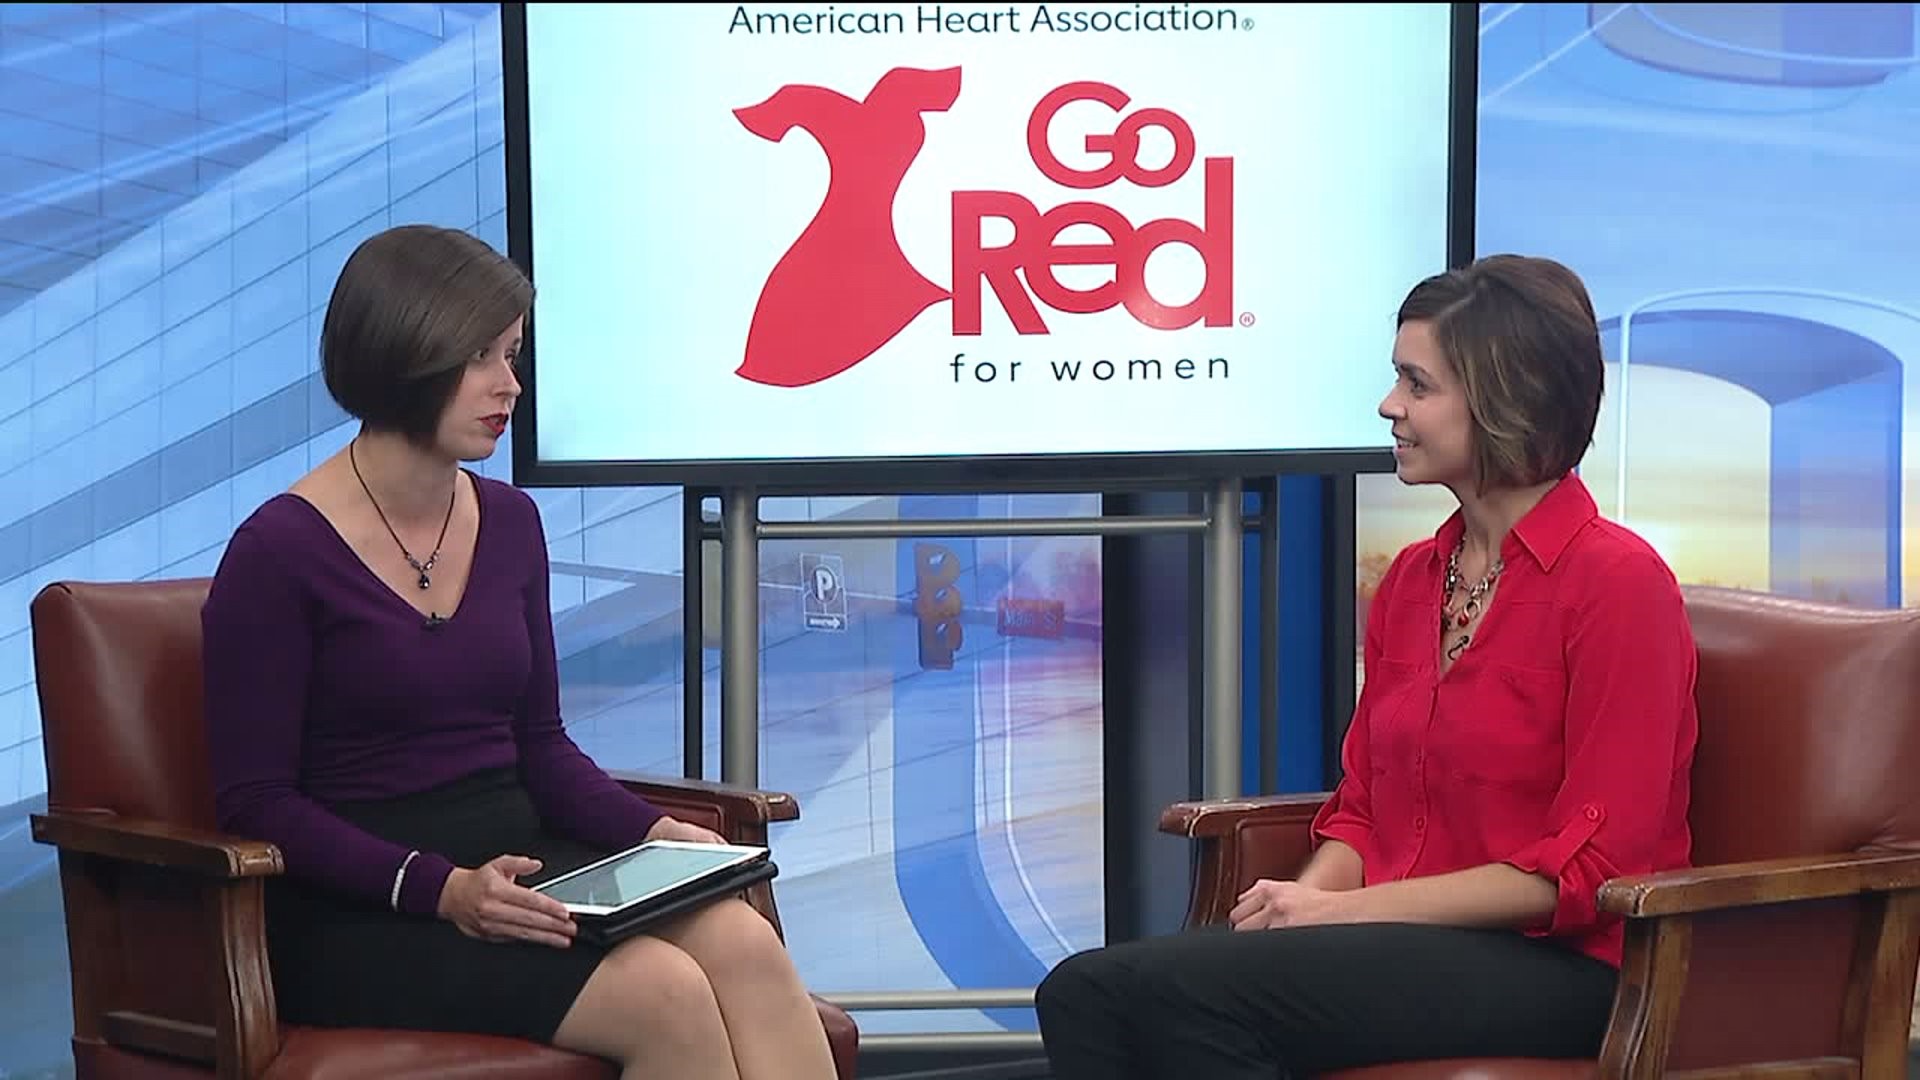 Why You Should Attend the Go Red for Women Dinner on October 24th